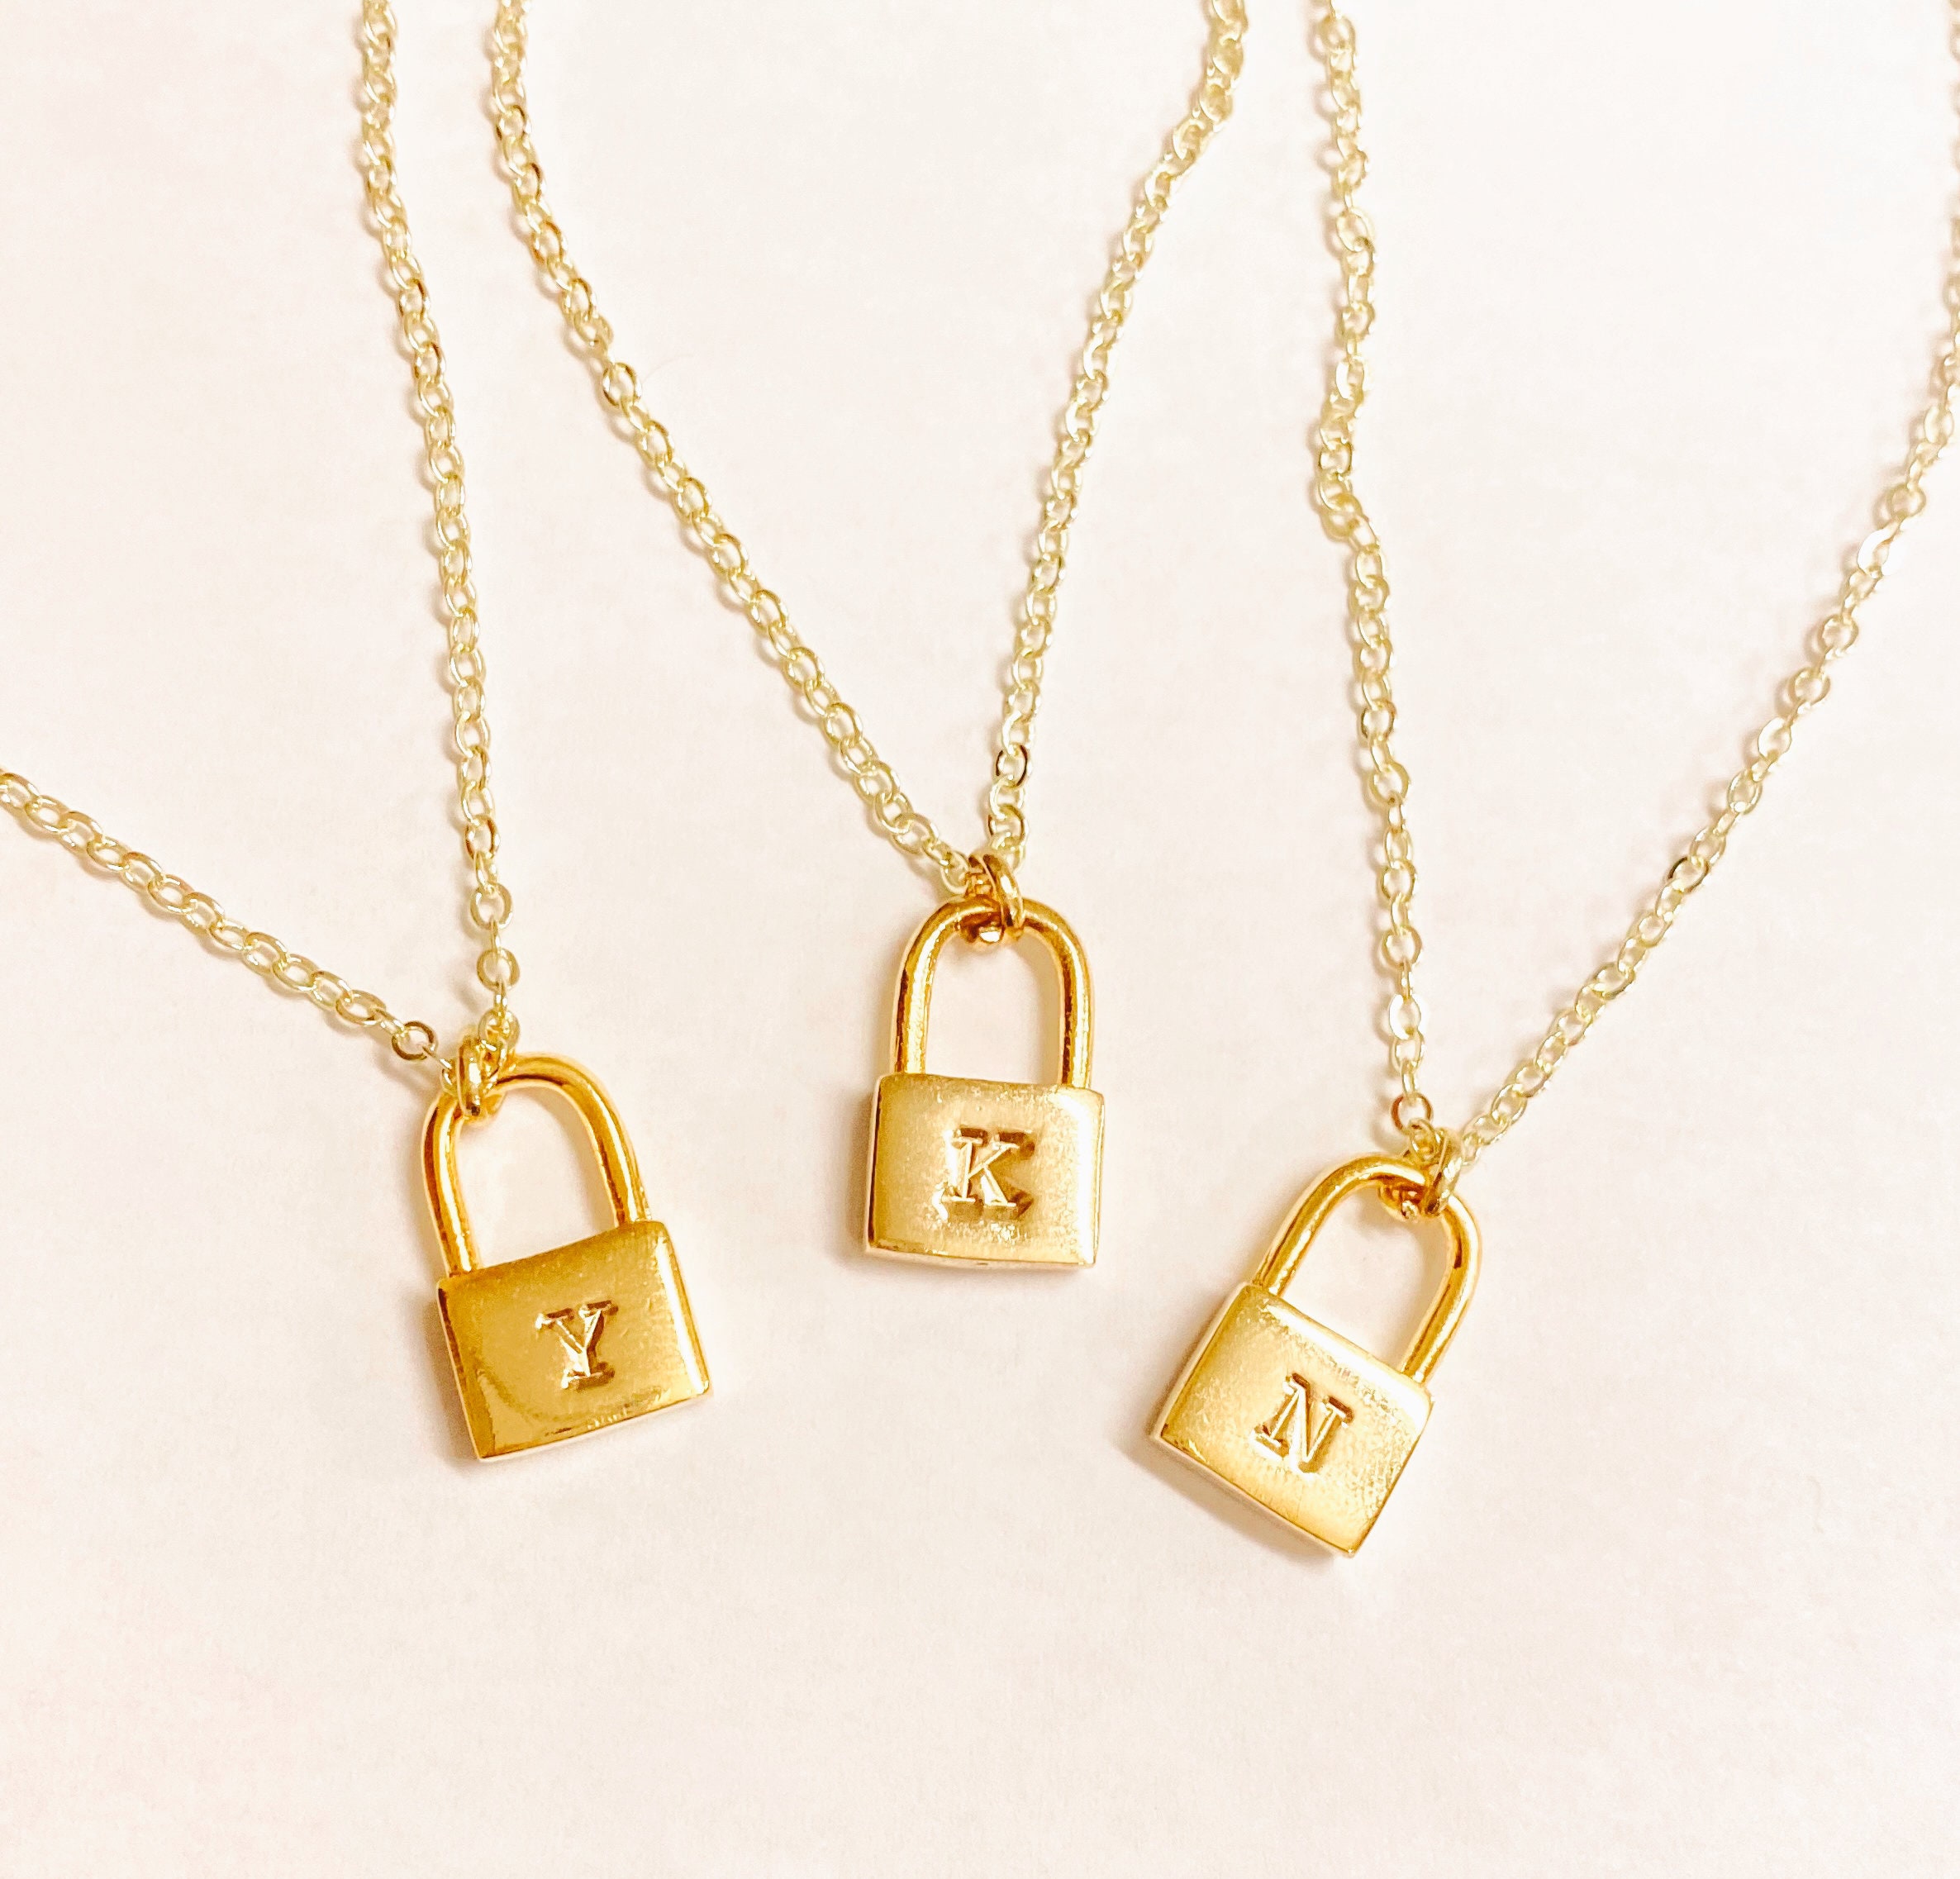 Embossed Padlock Necklace - The M Jewelers